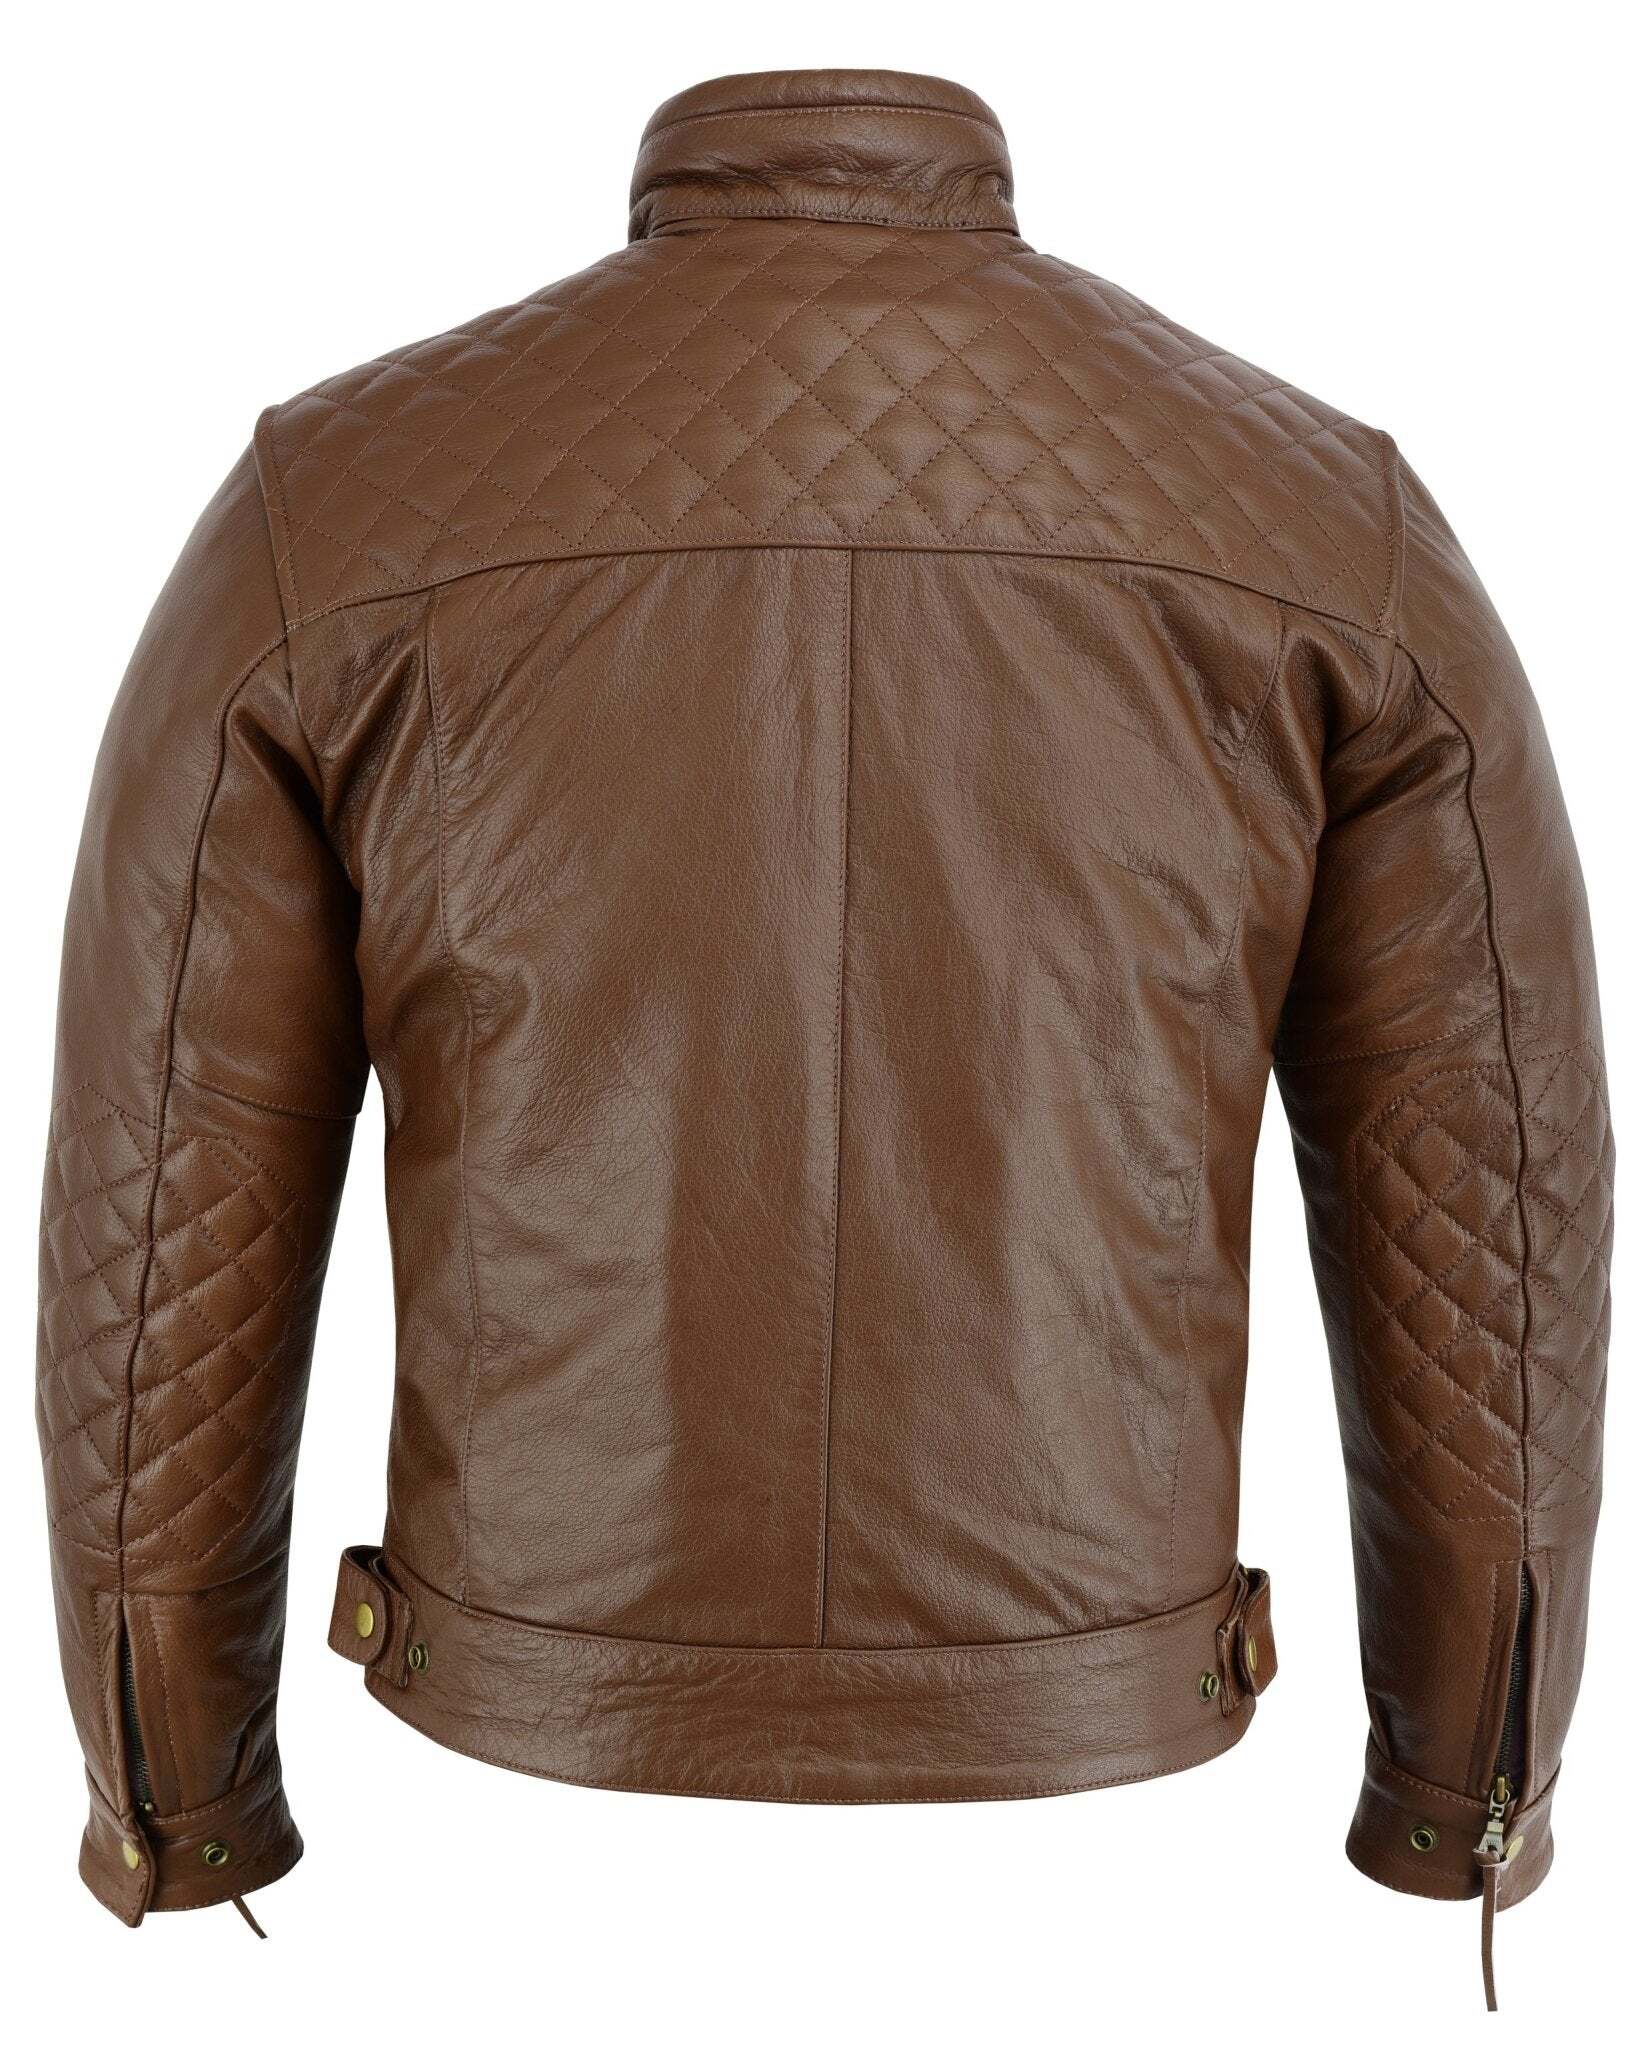 Mens's Black Motorcycle Diamond Leather Jacket CE Protection Cowhide